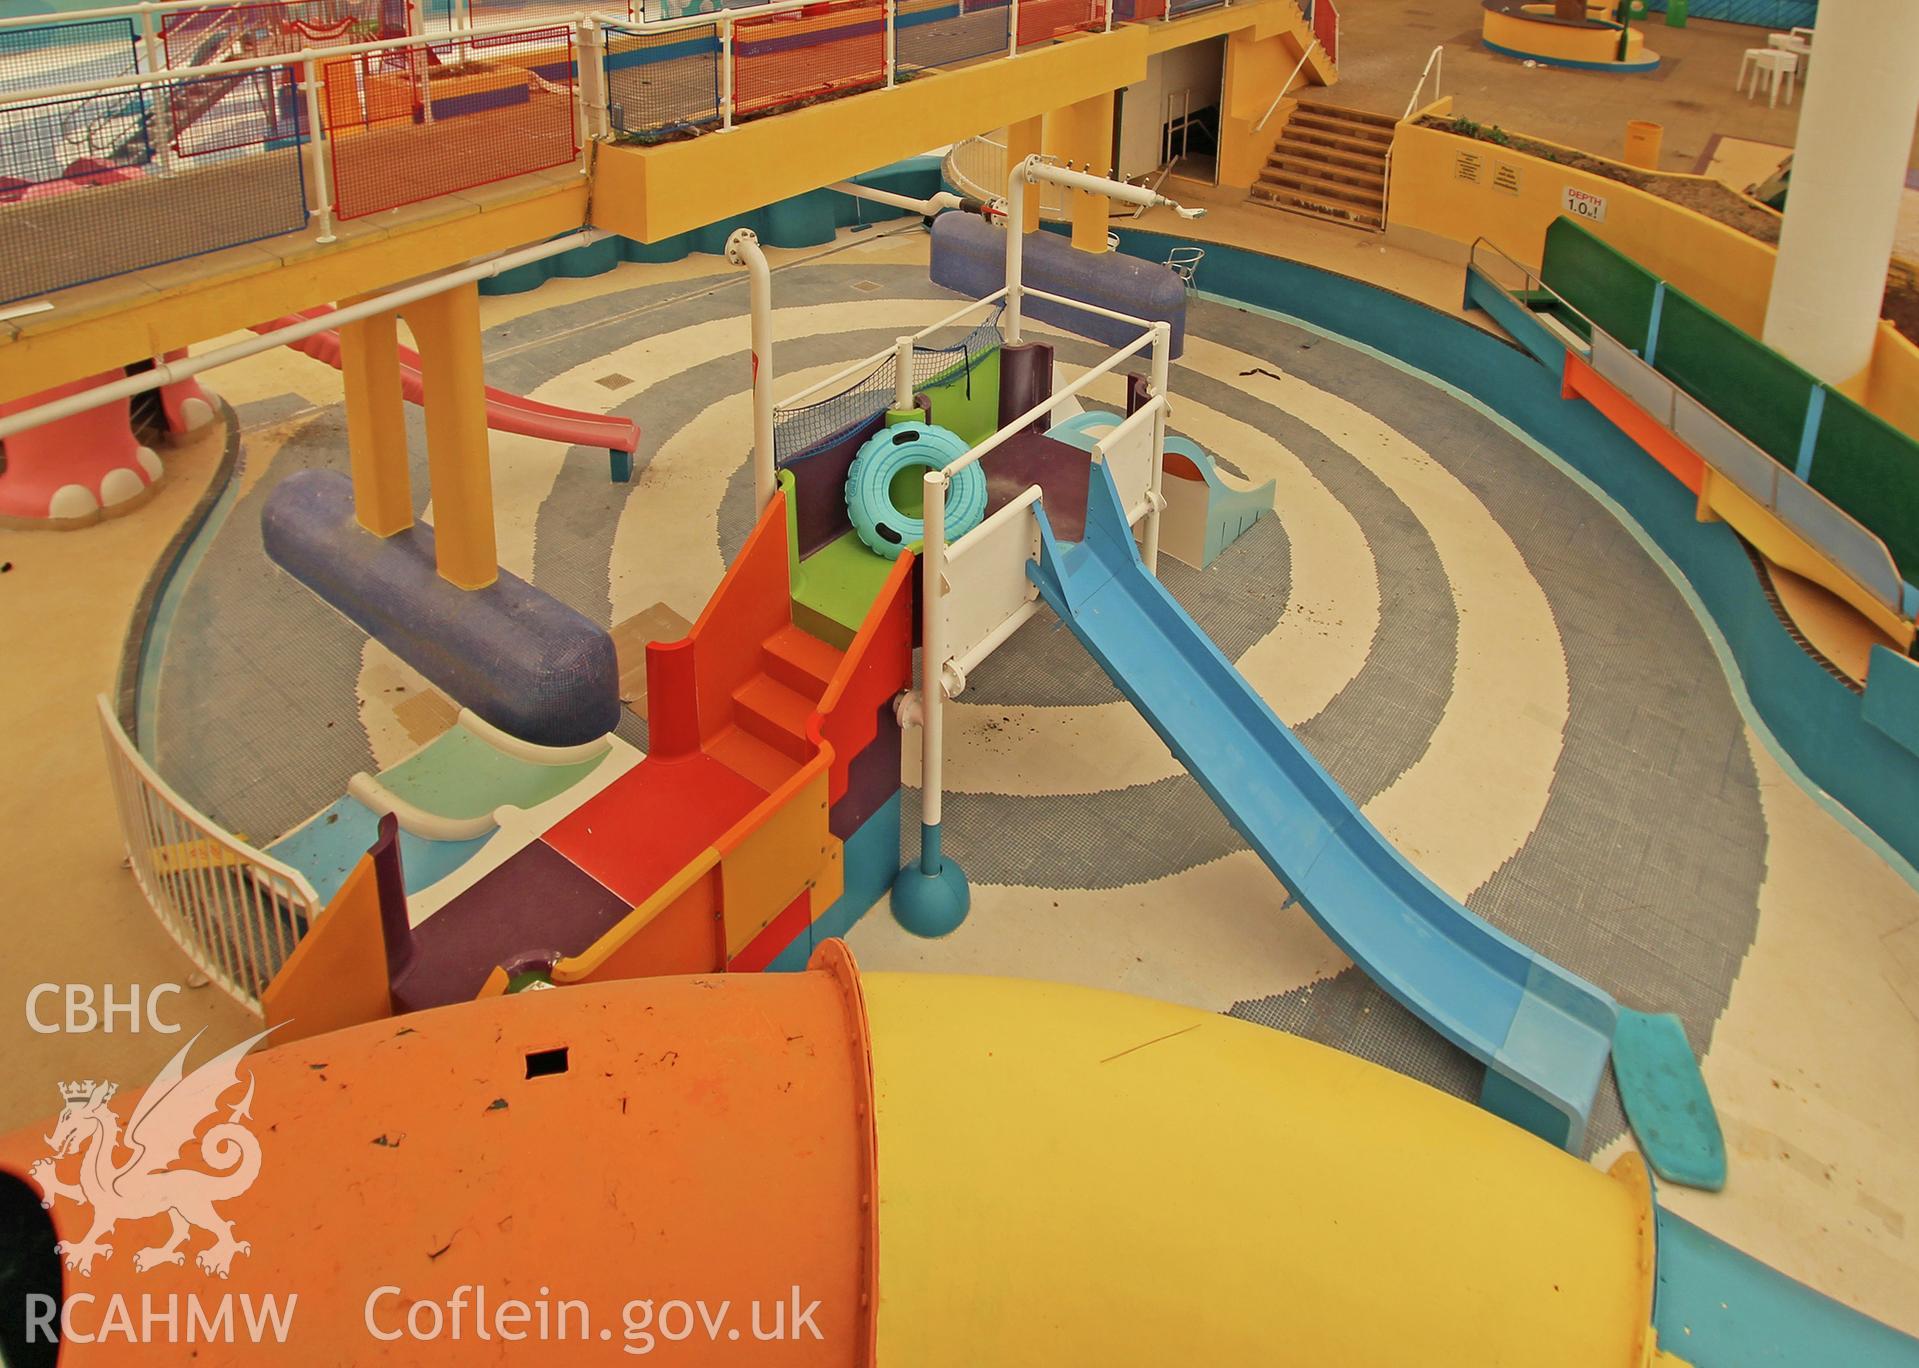 The children's pool at Rhyl Sun Centre, taken by Sue Fielding, 27th May 2016.